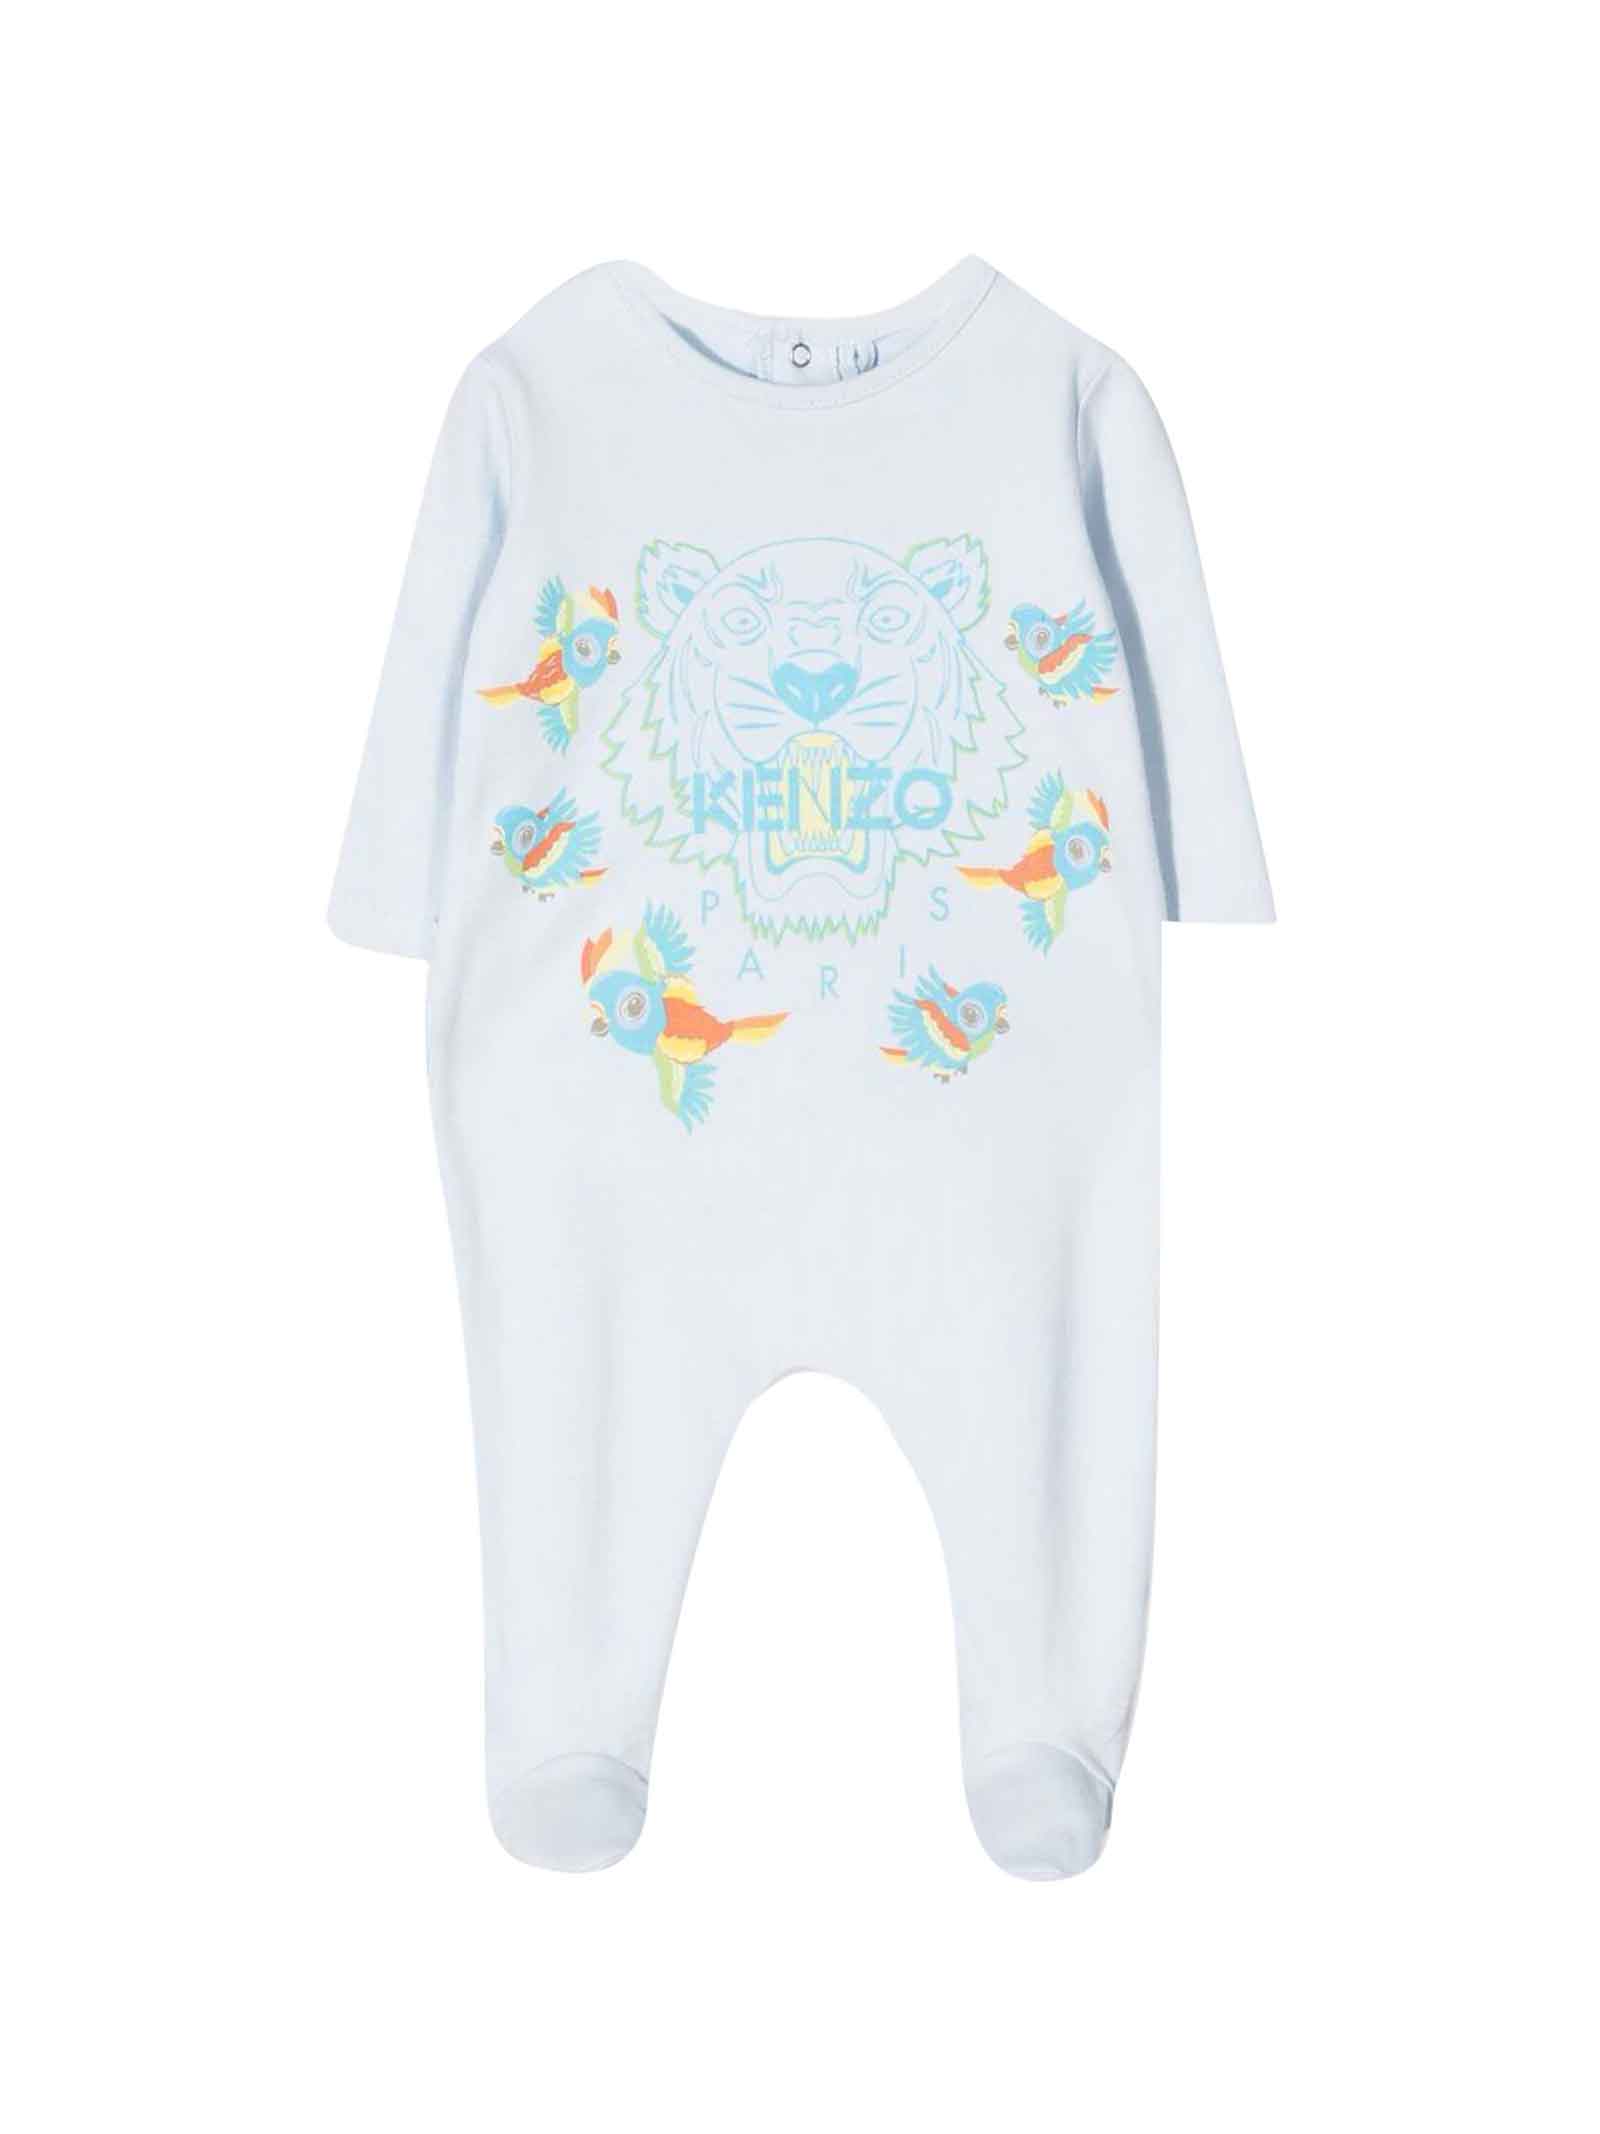 Kenzo Kids Light Blue Newborn Onesie With Tiger Print On The Front, Crew Neck, Long Sleeves And Back Button Closure By.